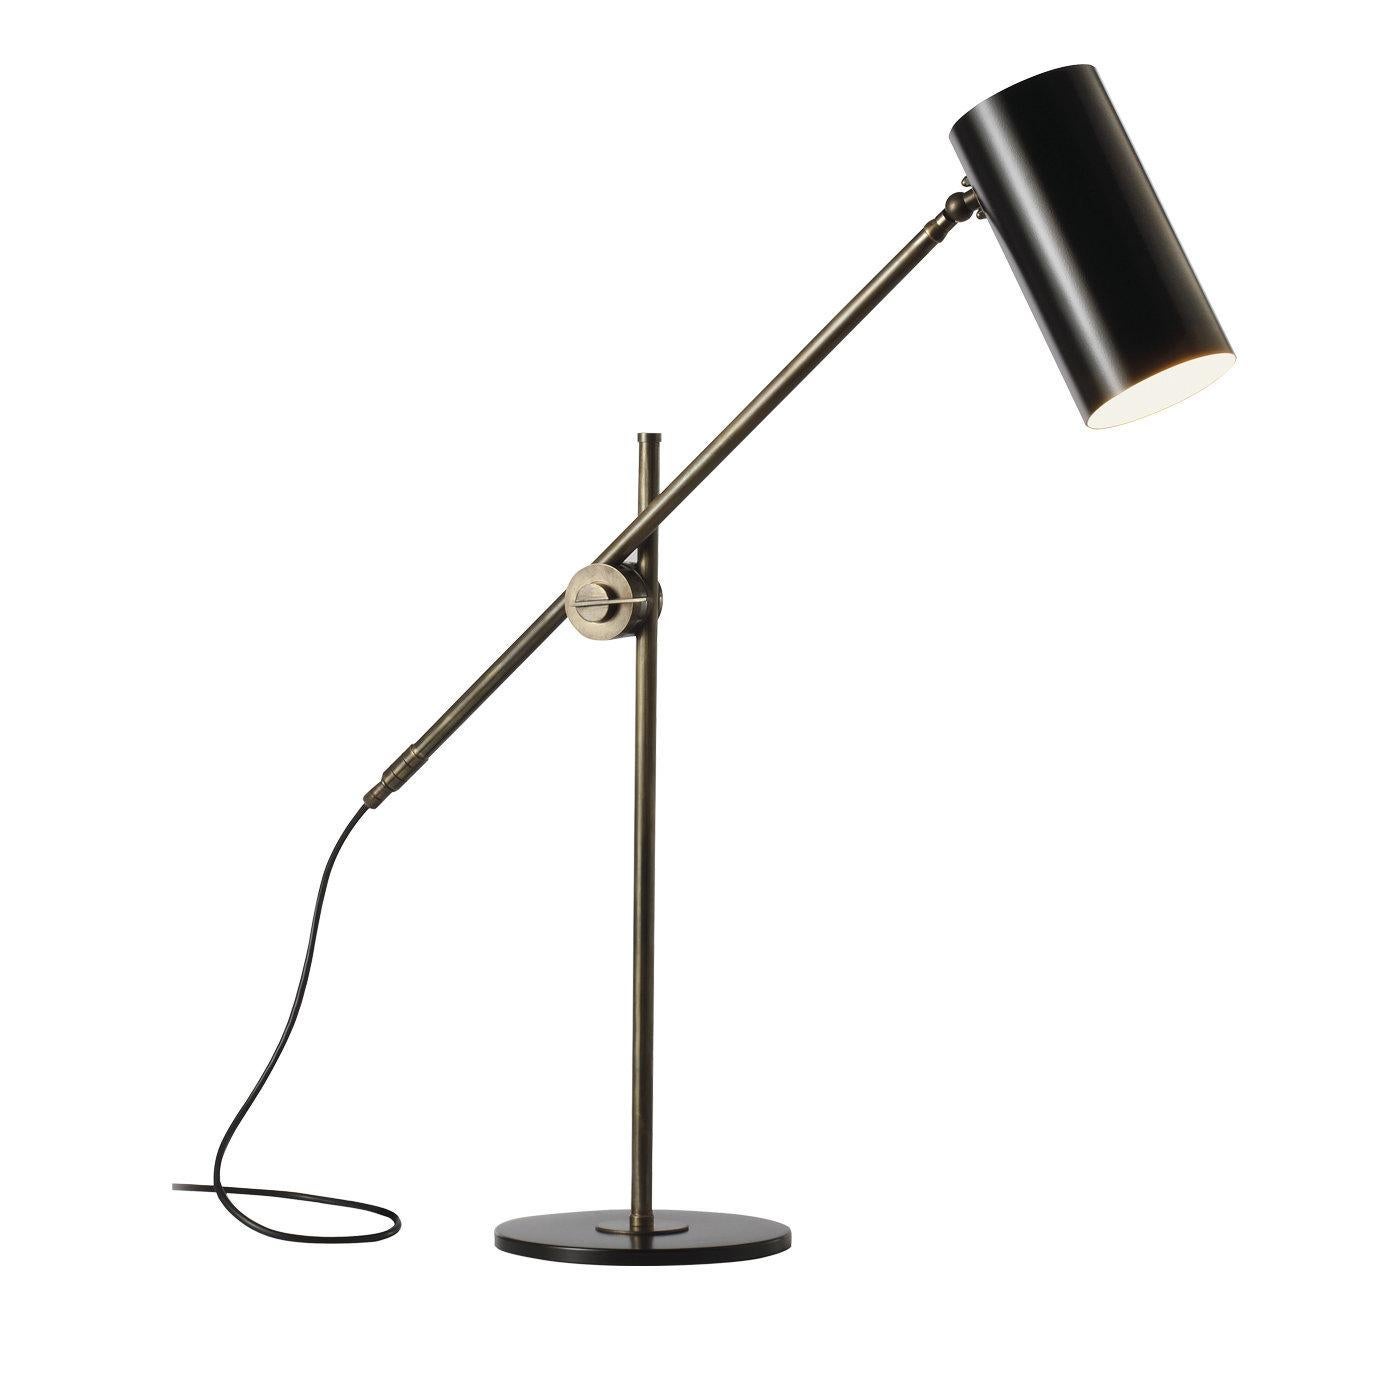 This exquisite desk lamp features geometric shapes and exudes simple sophistication. The round bottom and cylindrical shade are in metal varnished in a black to complement the bronze finish of the brass shafts that, joined together, allow for the